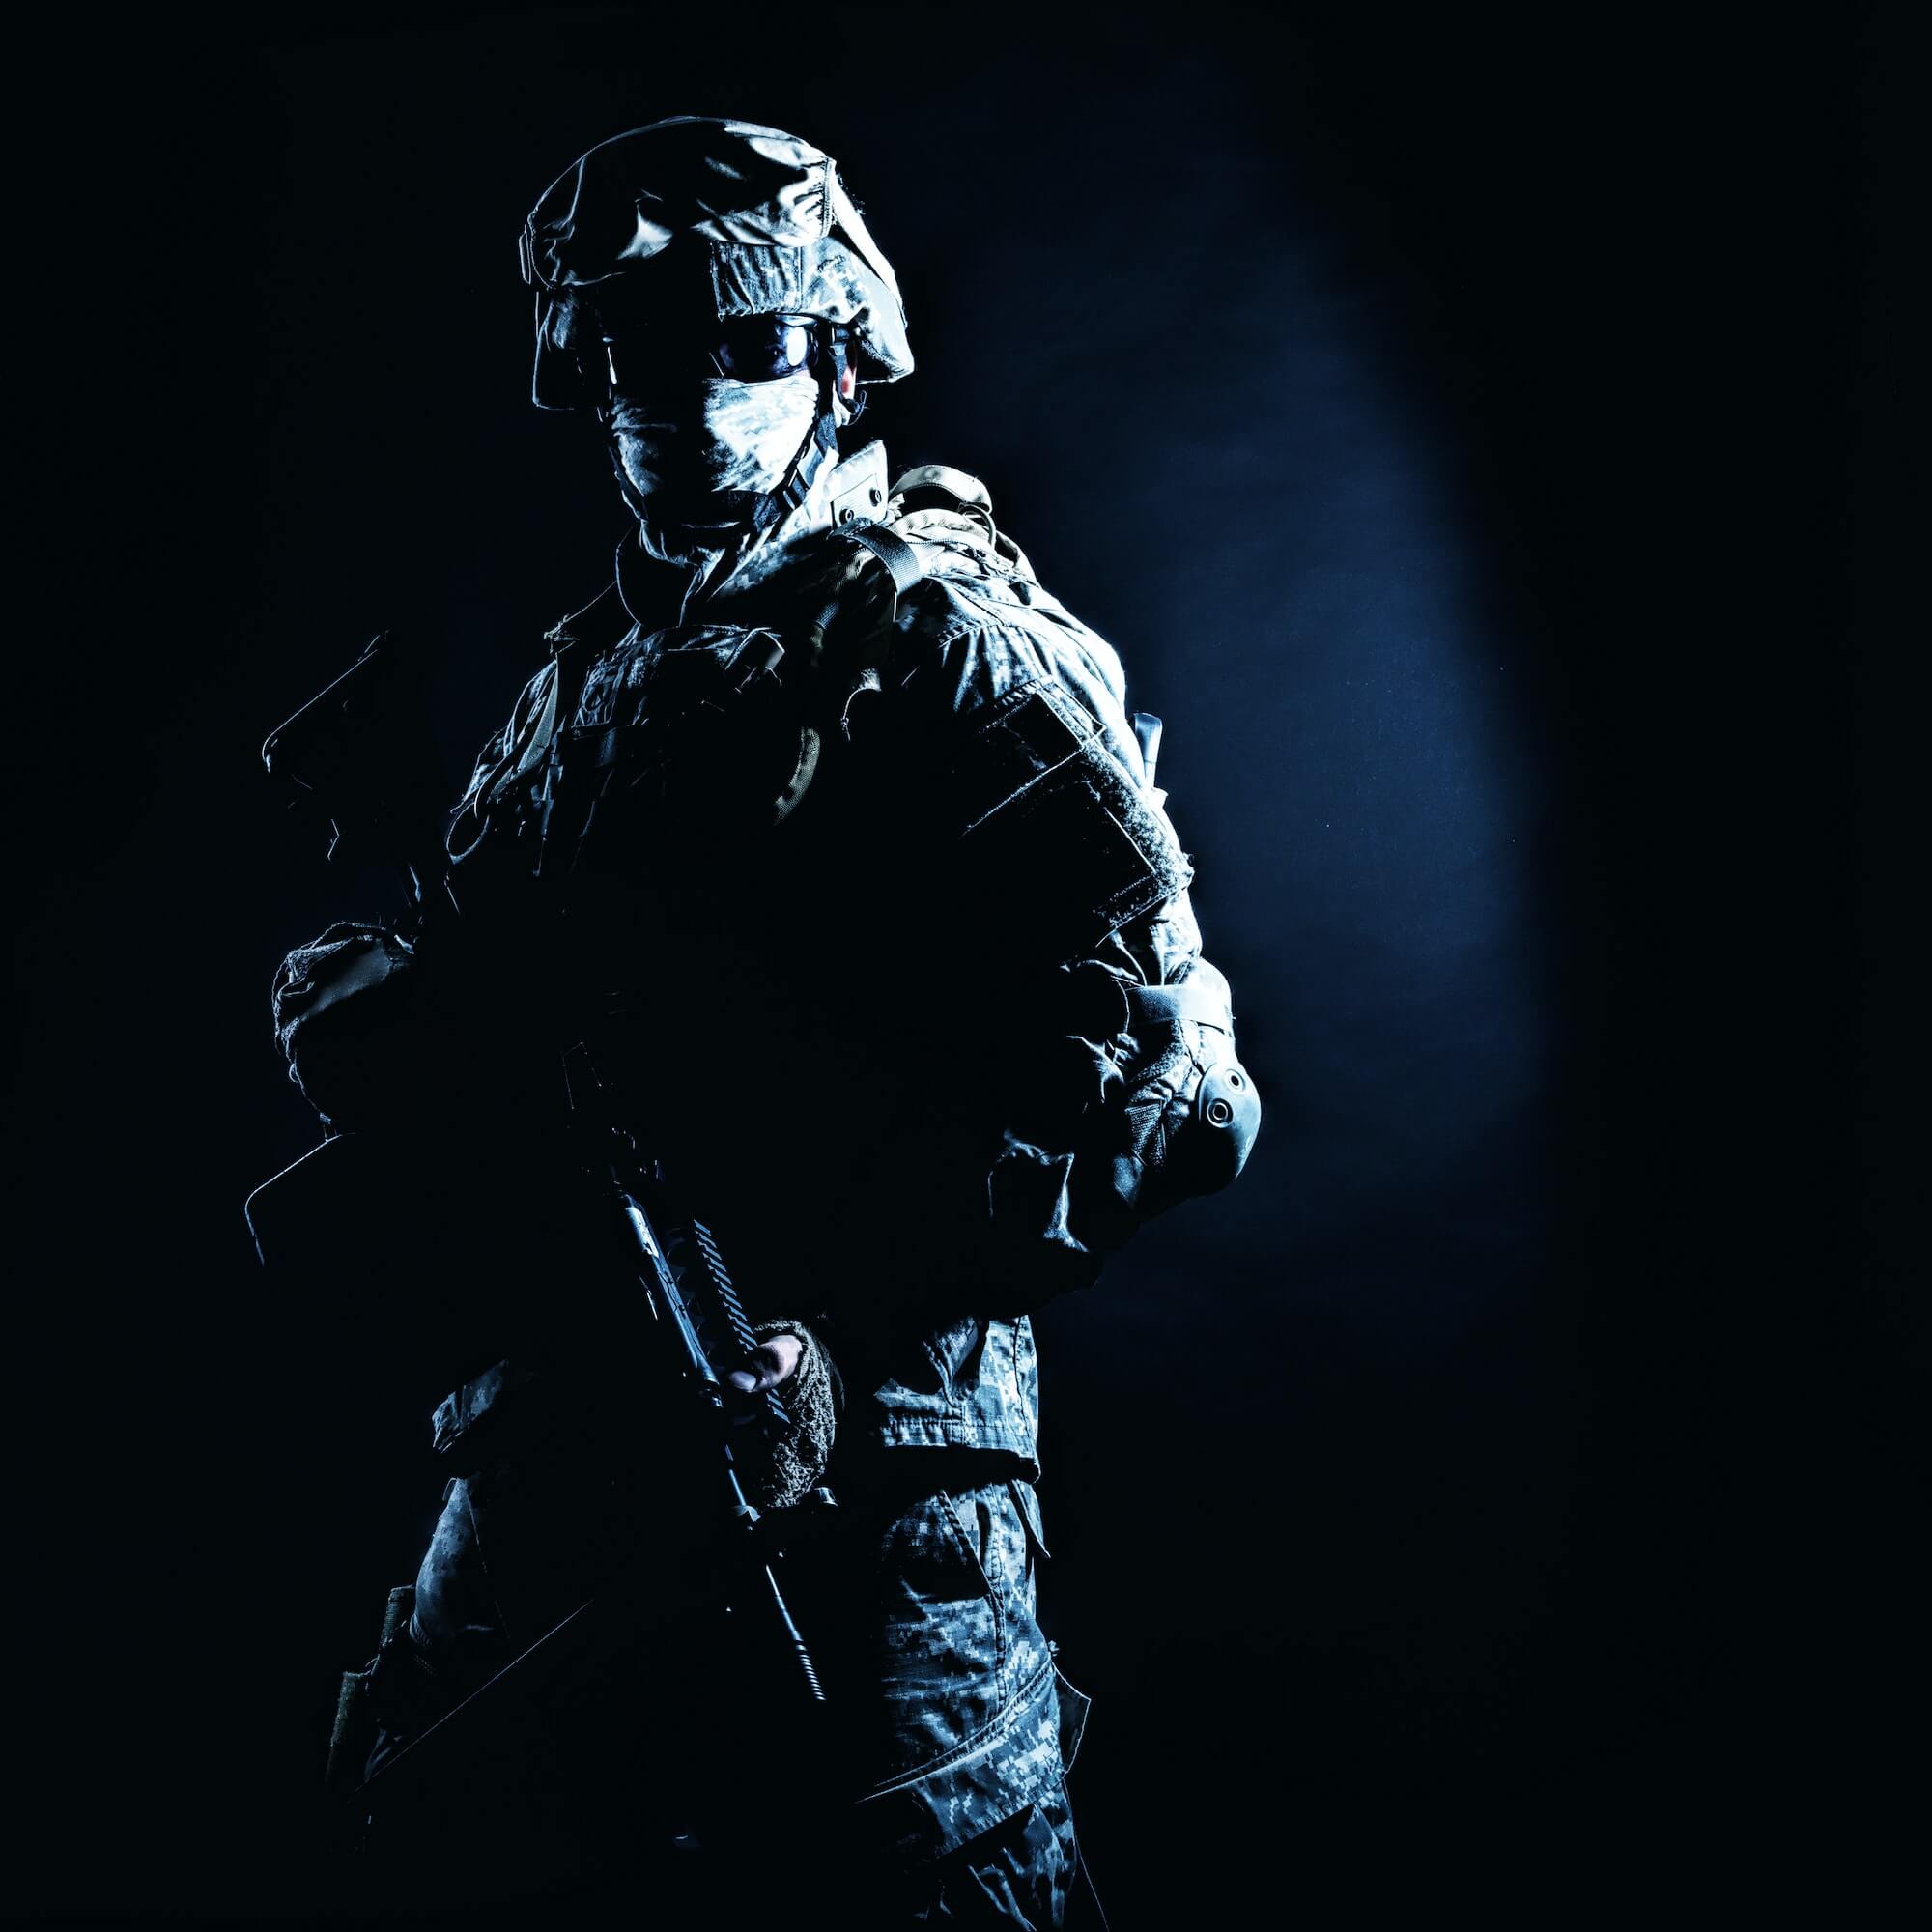 Infantry rifleman standing with weapon in darkness